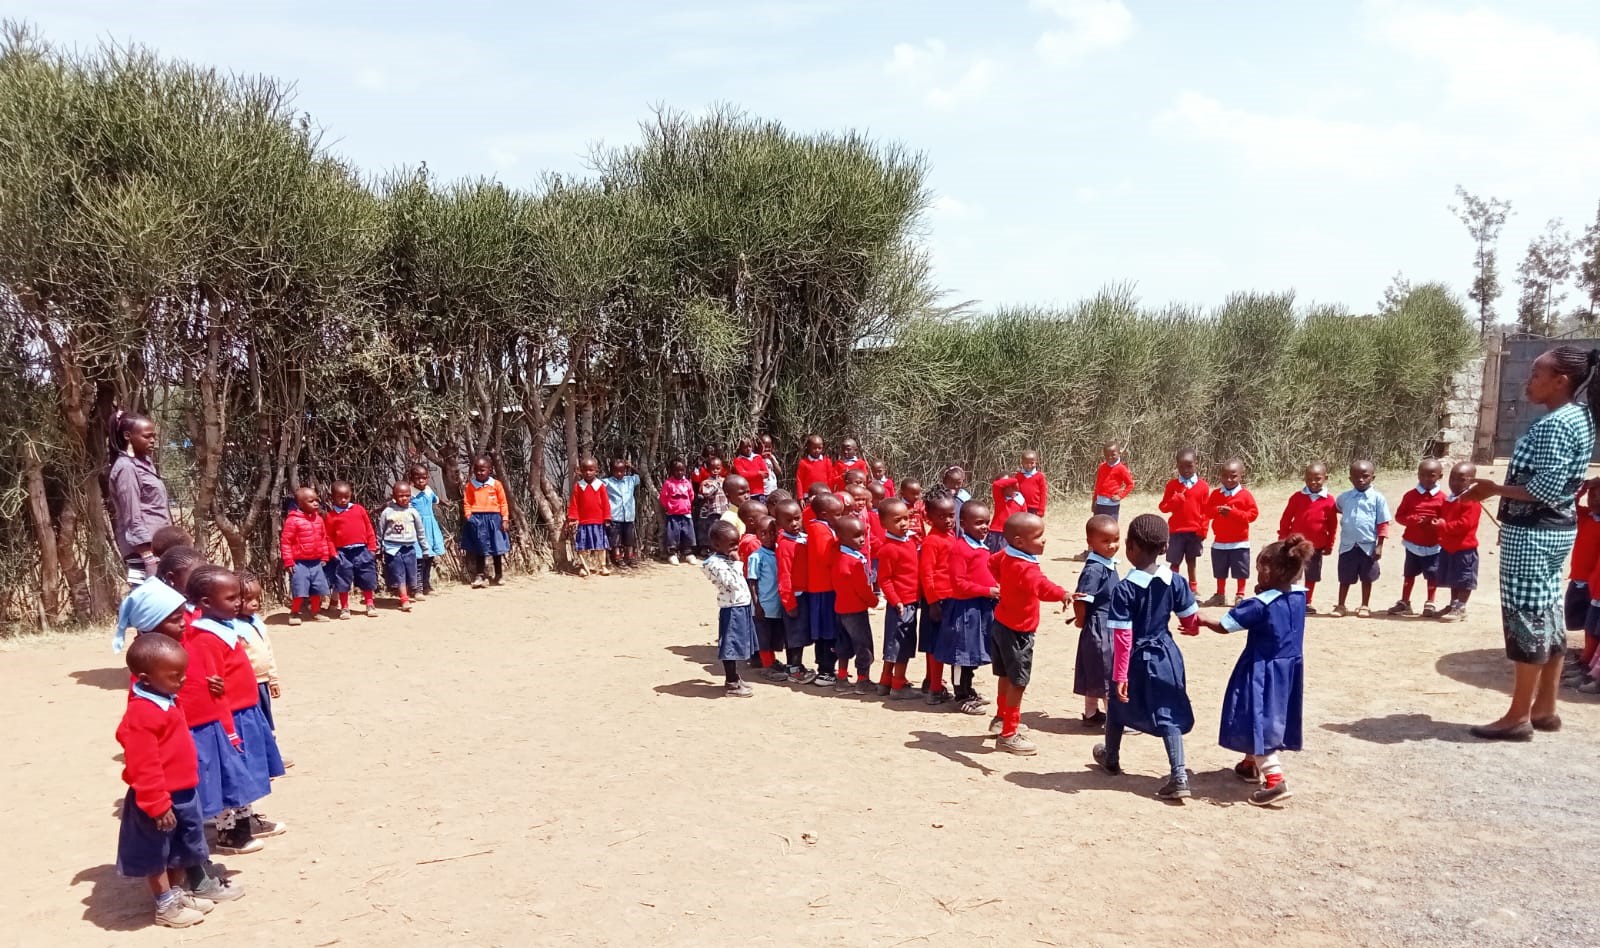 Students outside at a Shalom Preparatory school